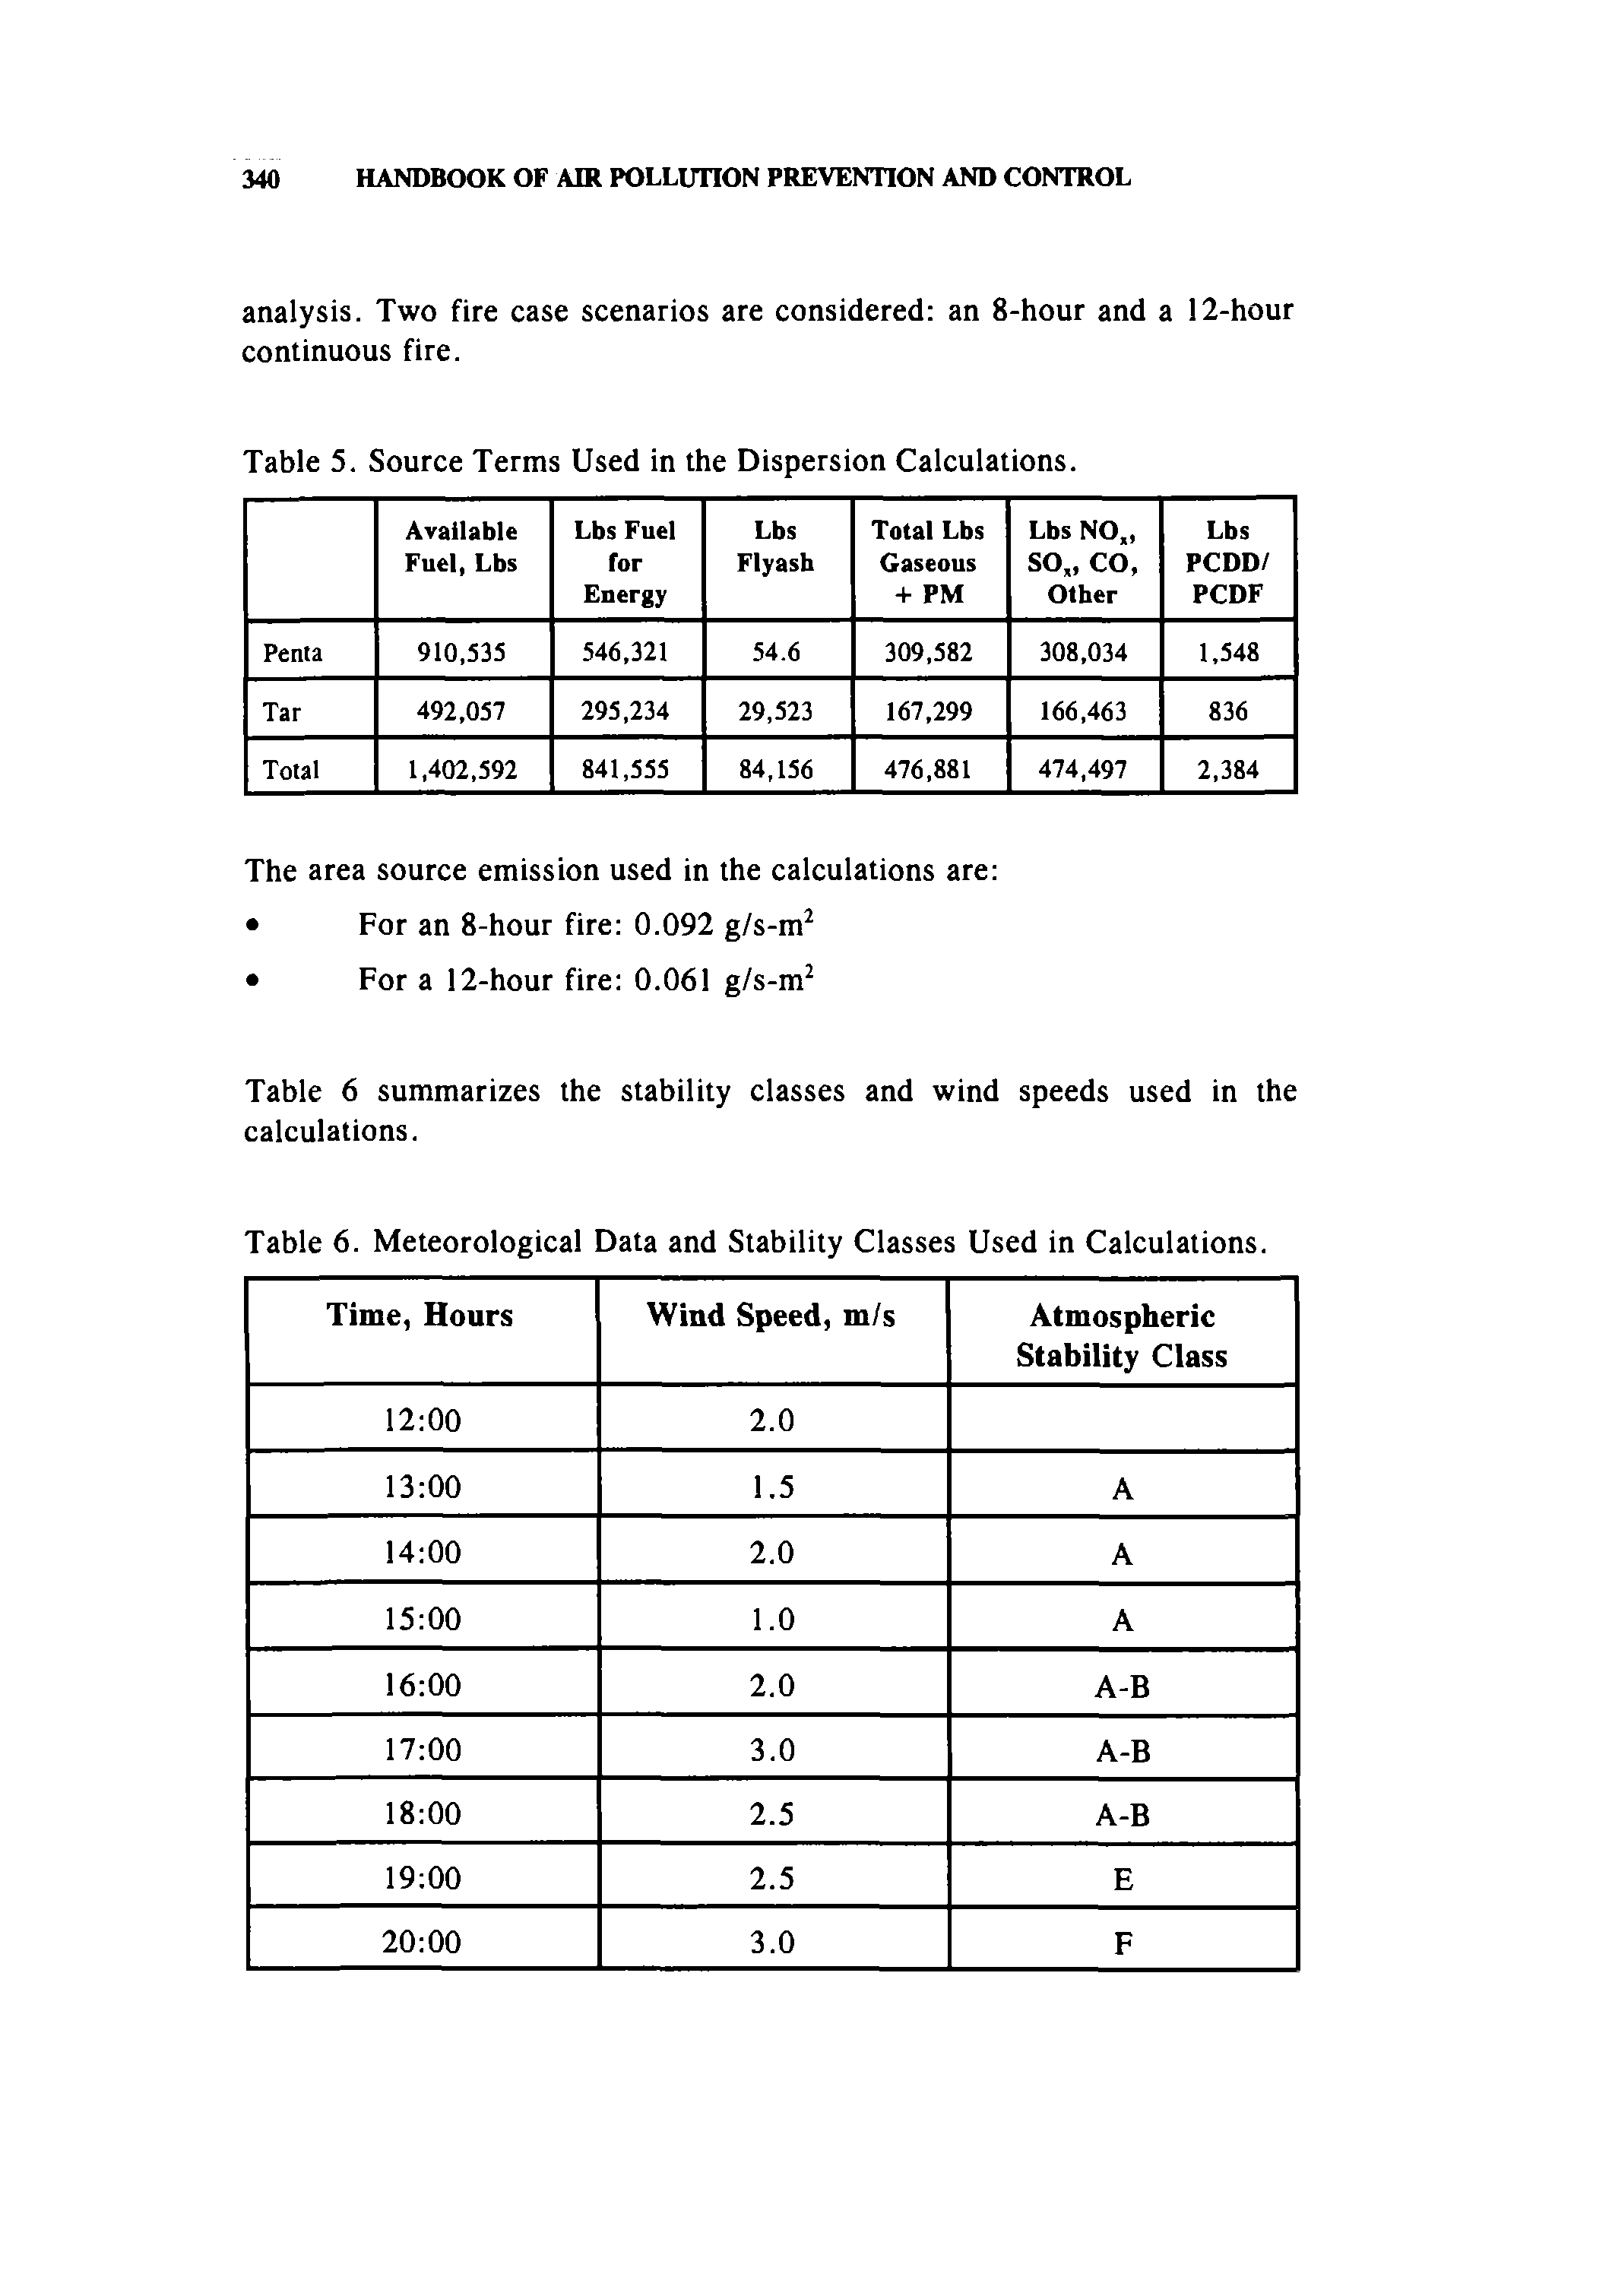 Table 5. Source Terms Used in the Dispersion Calculations.